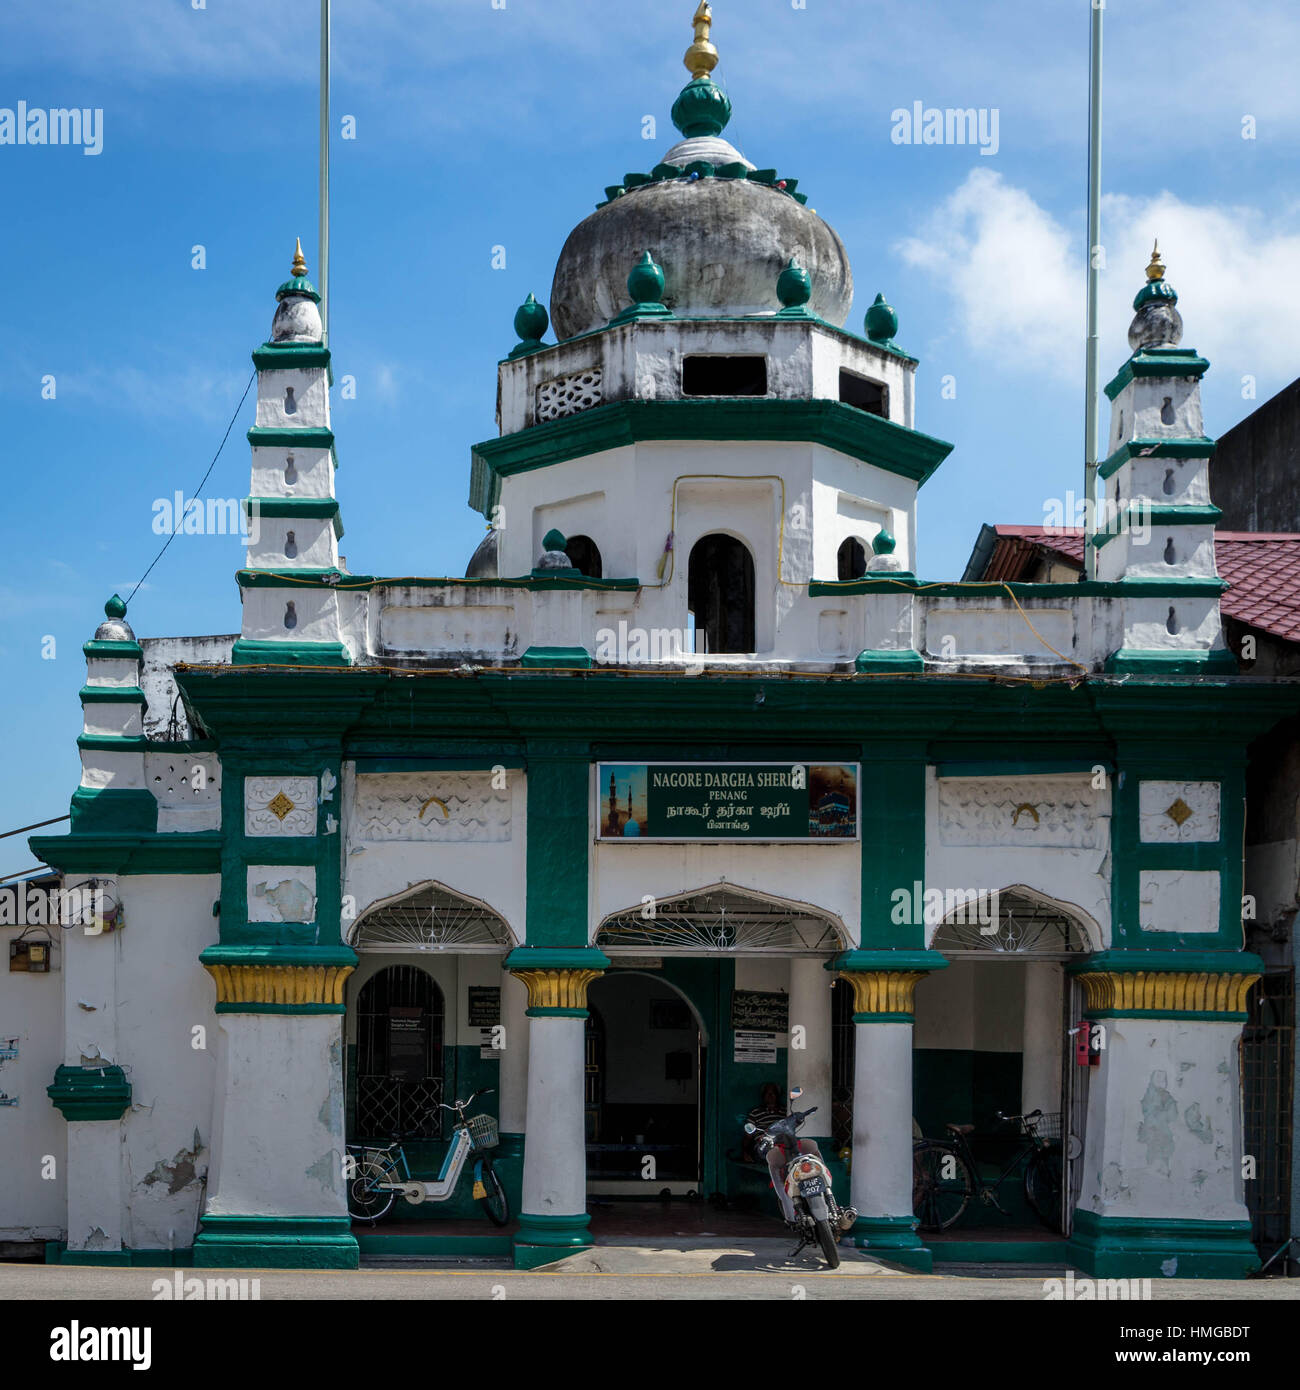 The Nagore Durgha Sheriff, built in the early 1800s, is the oldest Indian Muslim shrine in Penang (Malaysia) Stock Photo